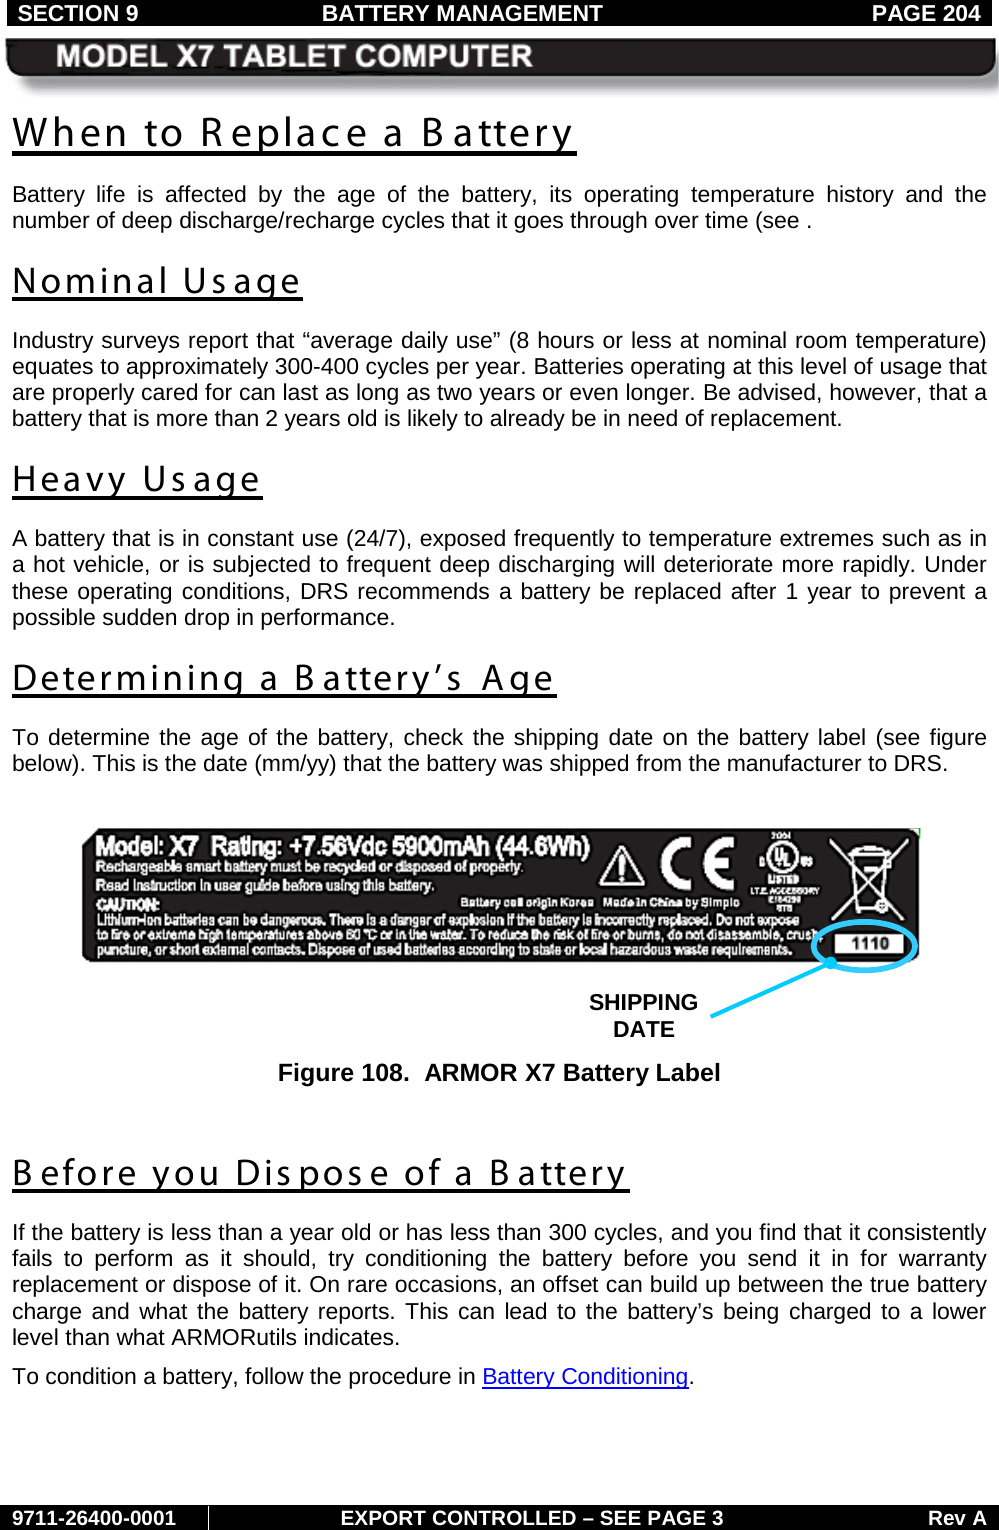 SECTION 9 BATTERY MANAGEMENT  PAGE 204     9711-26400-0001 EXPORT CONTROLLED – SEE PAGE 3 Rev A When to R eplace a B attery Battery life is affected by the age of the battery, its operating temperature history  and the number of deep discharge/recharge cycles that it goes through over time (see .  Nominal Us age Industry surveys report that “average daily use” (8 hours or less at nominal room temperature) equates to approximately 300-400 cycles per year. Batteries operating at this level of usage that are properly cared for can last as long as two years or even longer. Be advised, however, that a battery that is more than 2 years old is likely to already be in need of replacement. Heavy Usage A battery that is in constant use (24/7), exposed frequently to temperature extremes such as in a hot vehicle, or is subjected to frequent deep discharging will deteriorate more rapidly. Under these operating conditions, DRS recommends a battery be replaced after 1 year to prevent a possible sudden drop in performance. Determining a B attery’s Age To determine the age of the battery, check the shipping date on the battery label (see figure below). This is the date (mm/yy) that the battery was shipped from the manufacturer to DRS.     Figure 108.  ARMOR X7 Battery Label  B efore you Dispos e of a B attery If the battery is less than a year old or has less than 300 cycles, and you find that it consistently fails to perform as it should, try conditioning the battery before you send it in for warranty replacement or dispose of it. On rare occasions, an offset can build up between the true battery charge and what the battery reports. This can lead to the battery’s being charged to a lower level than what ARMORutils indicates.  To condition a battery, follow the procedure in Battery Conditioning. SHIPPING DATE  